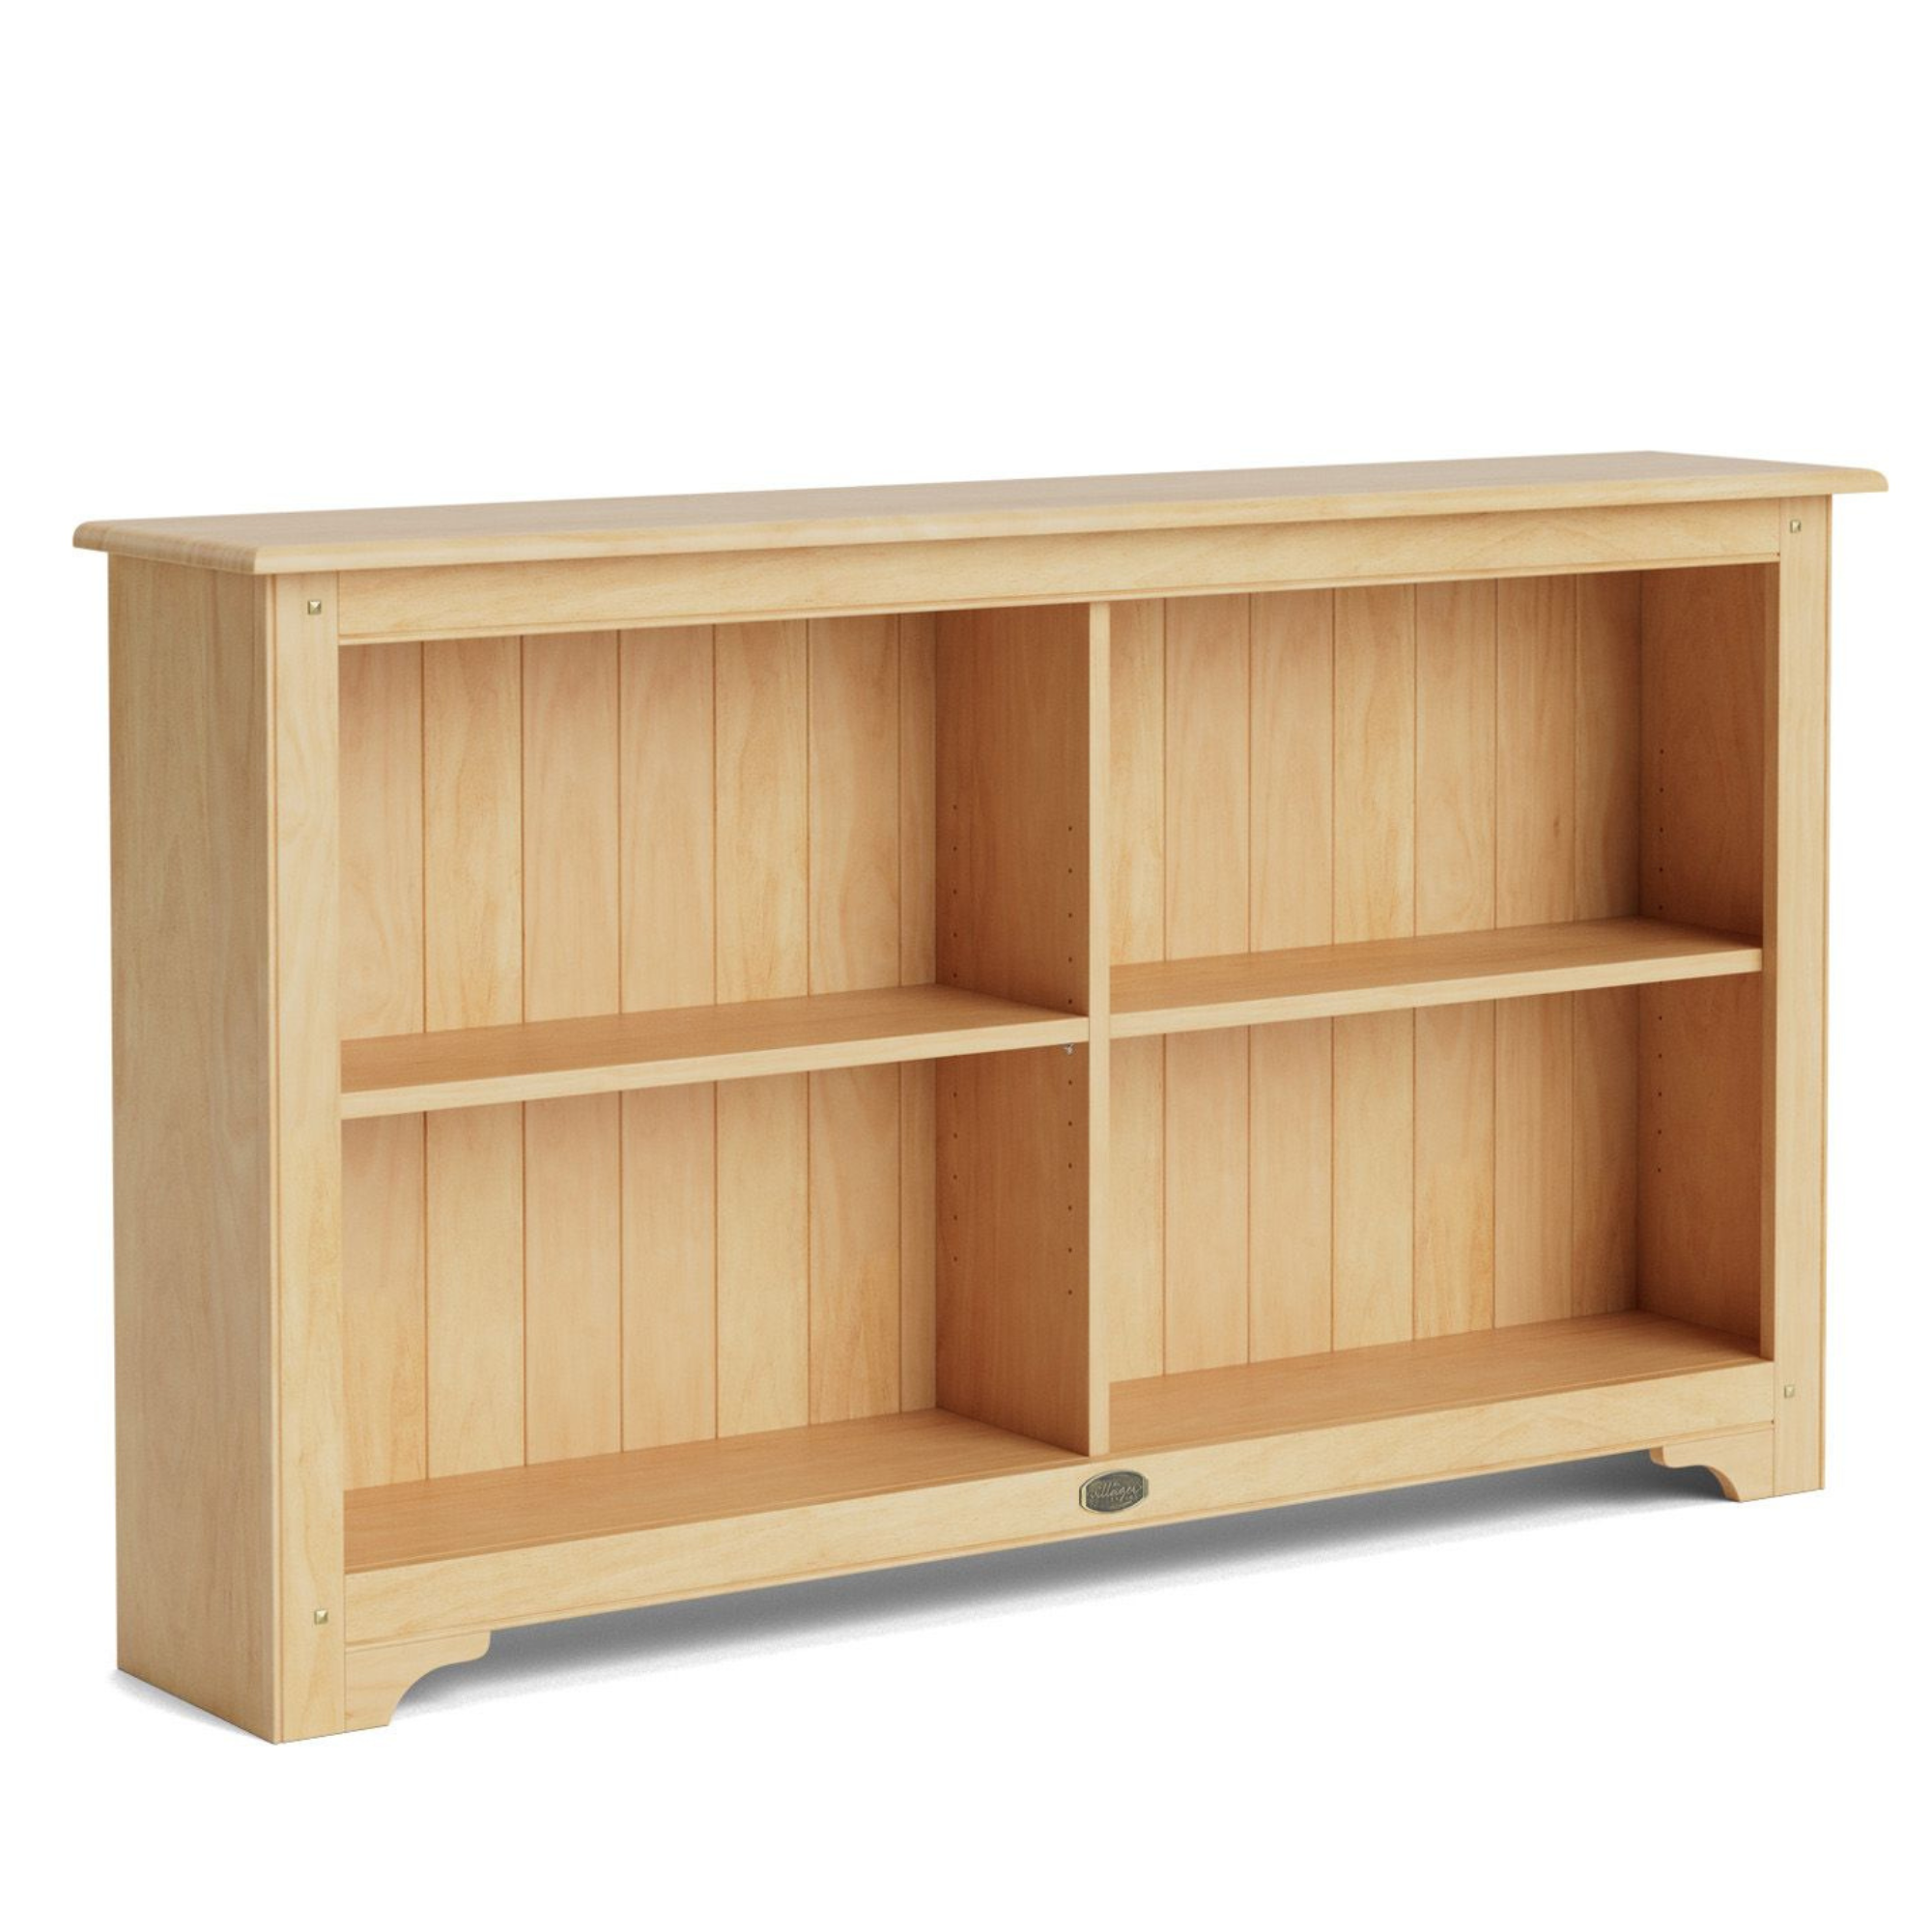 VILLAGER BOOKCASES | 4 SIZES | NZ MADE